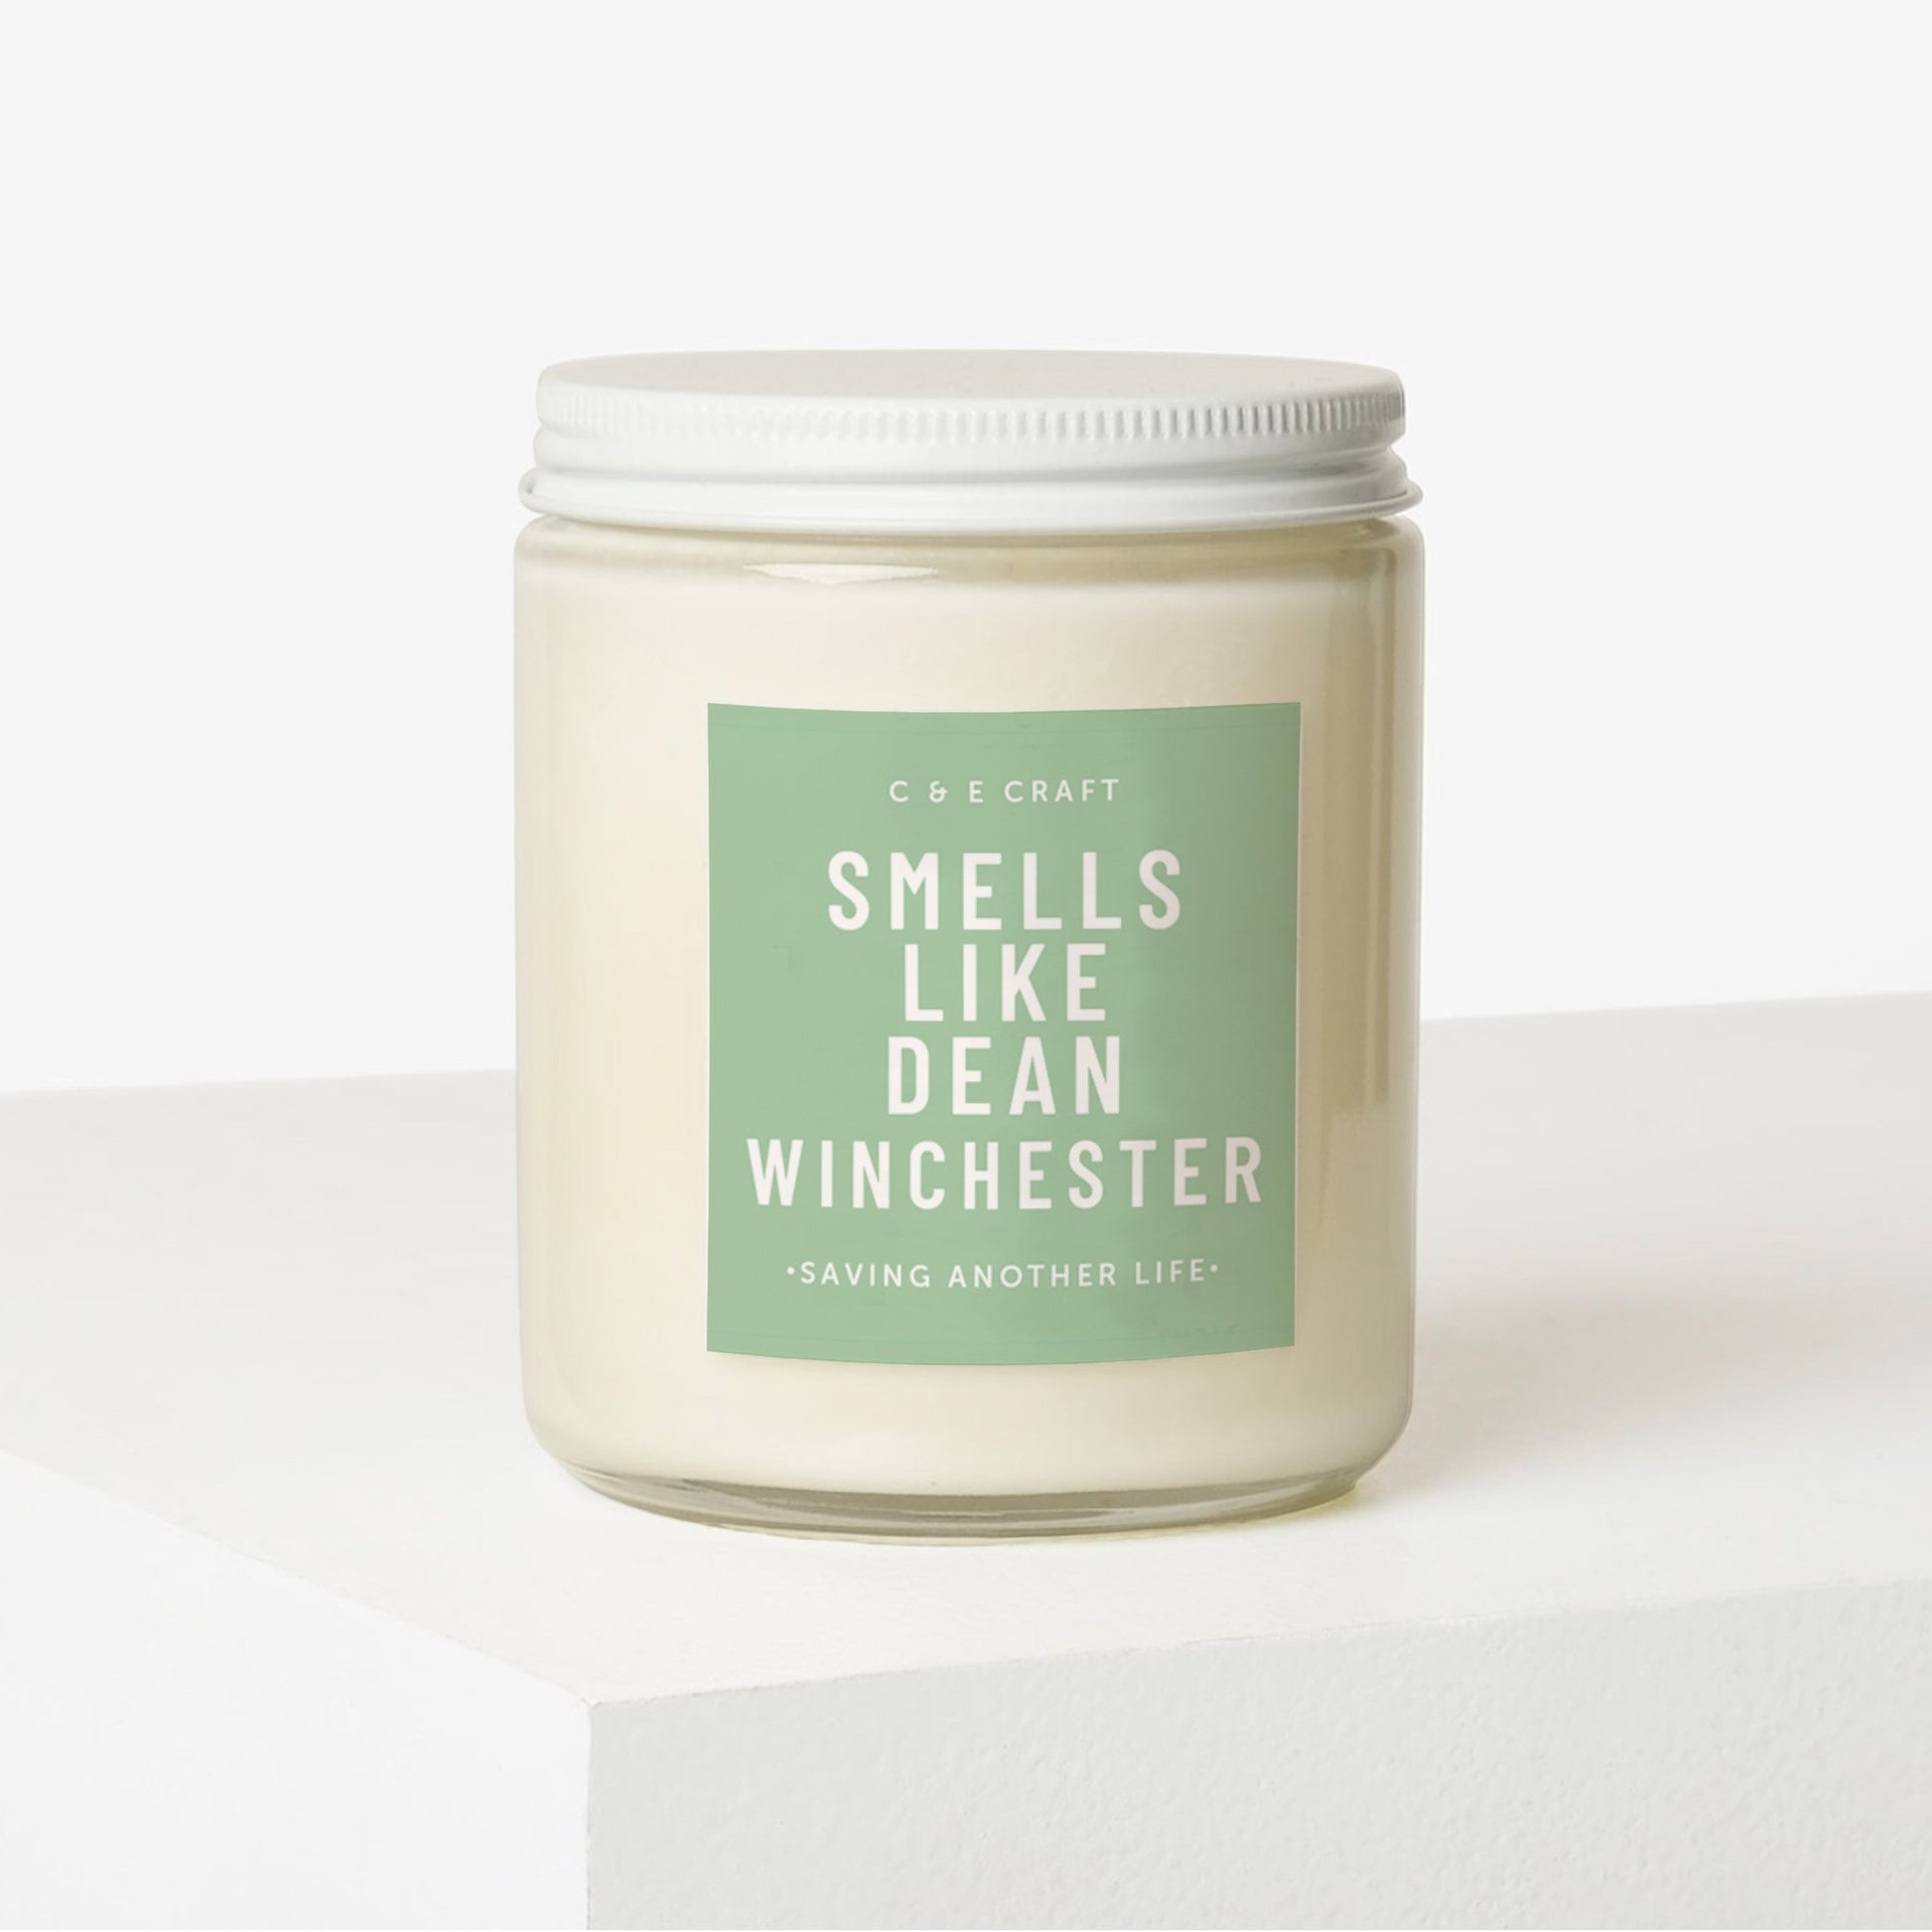 Smells Like Dean Winchester Candle C & E Craft Co 